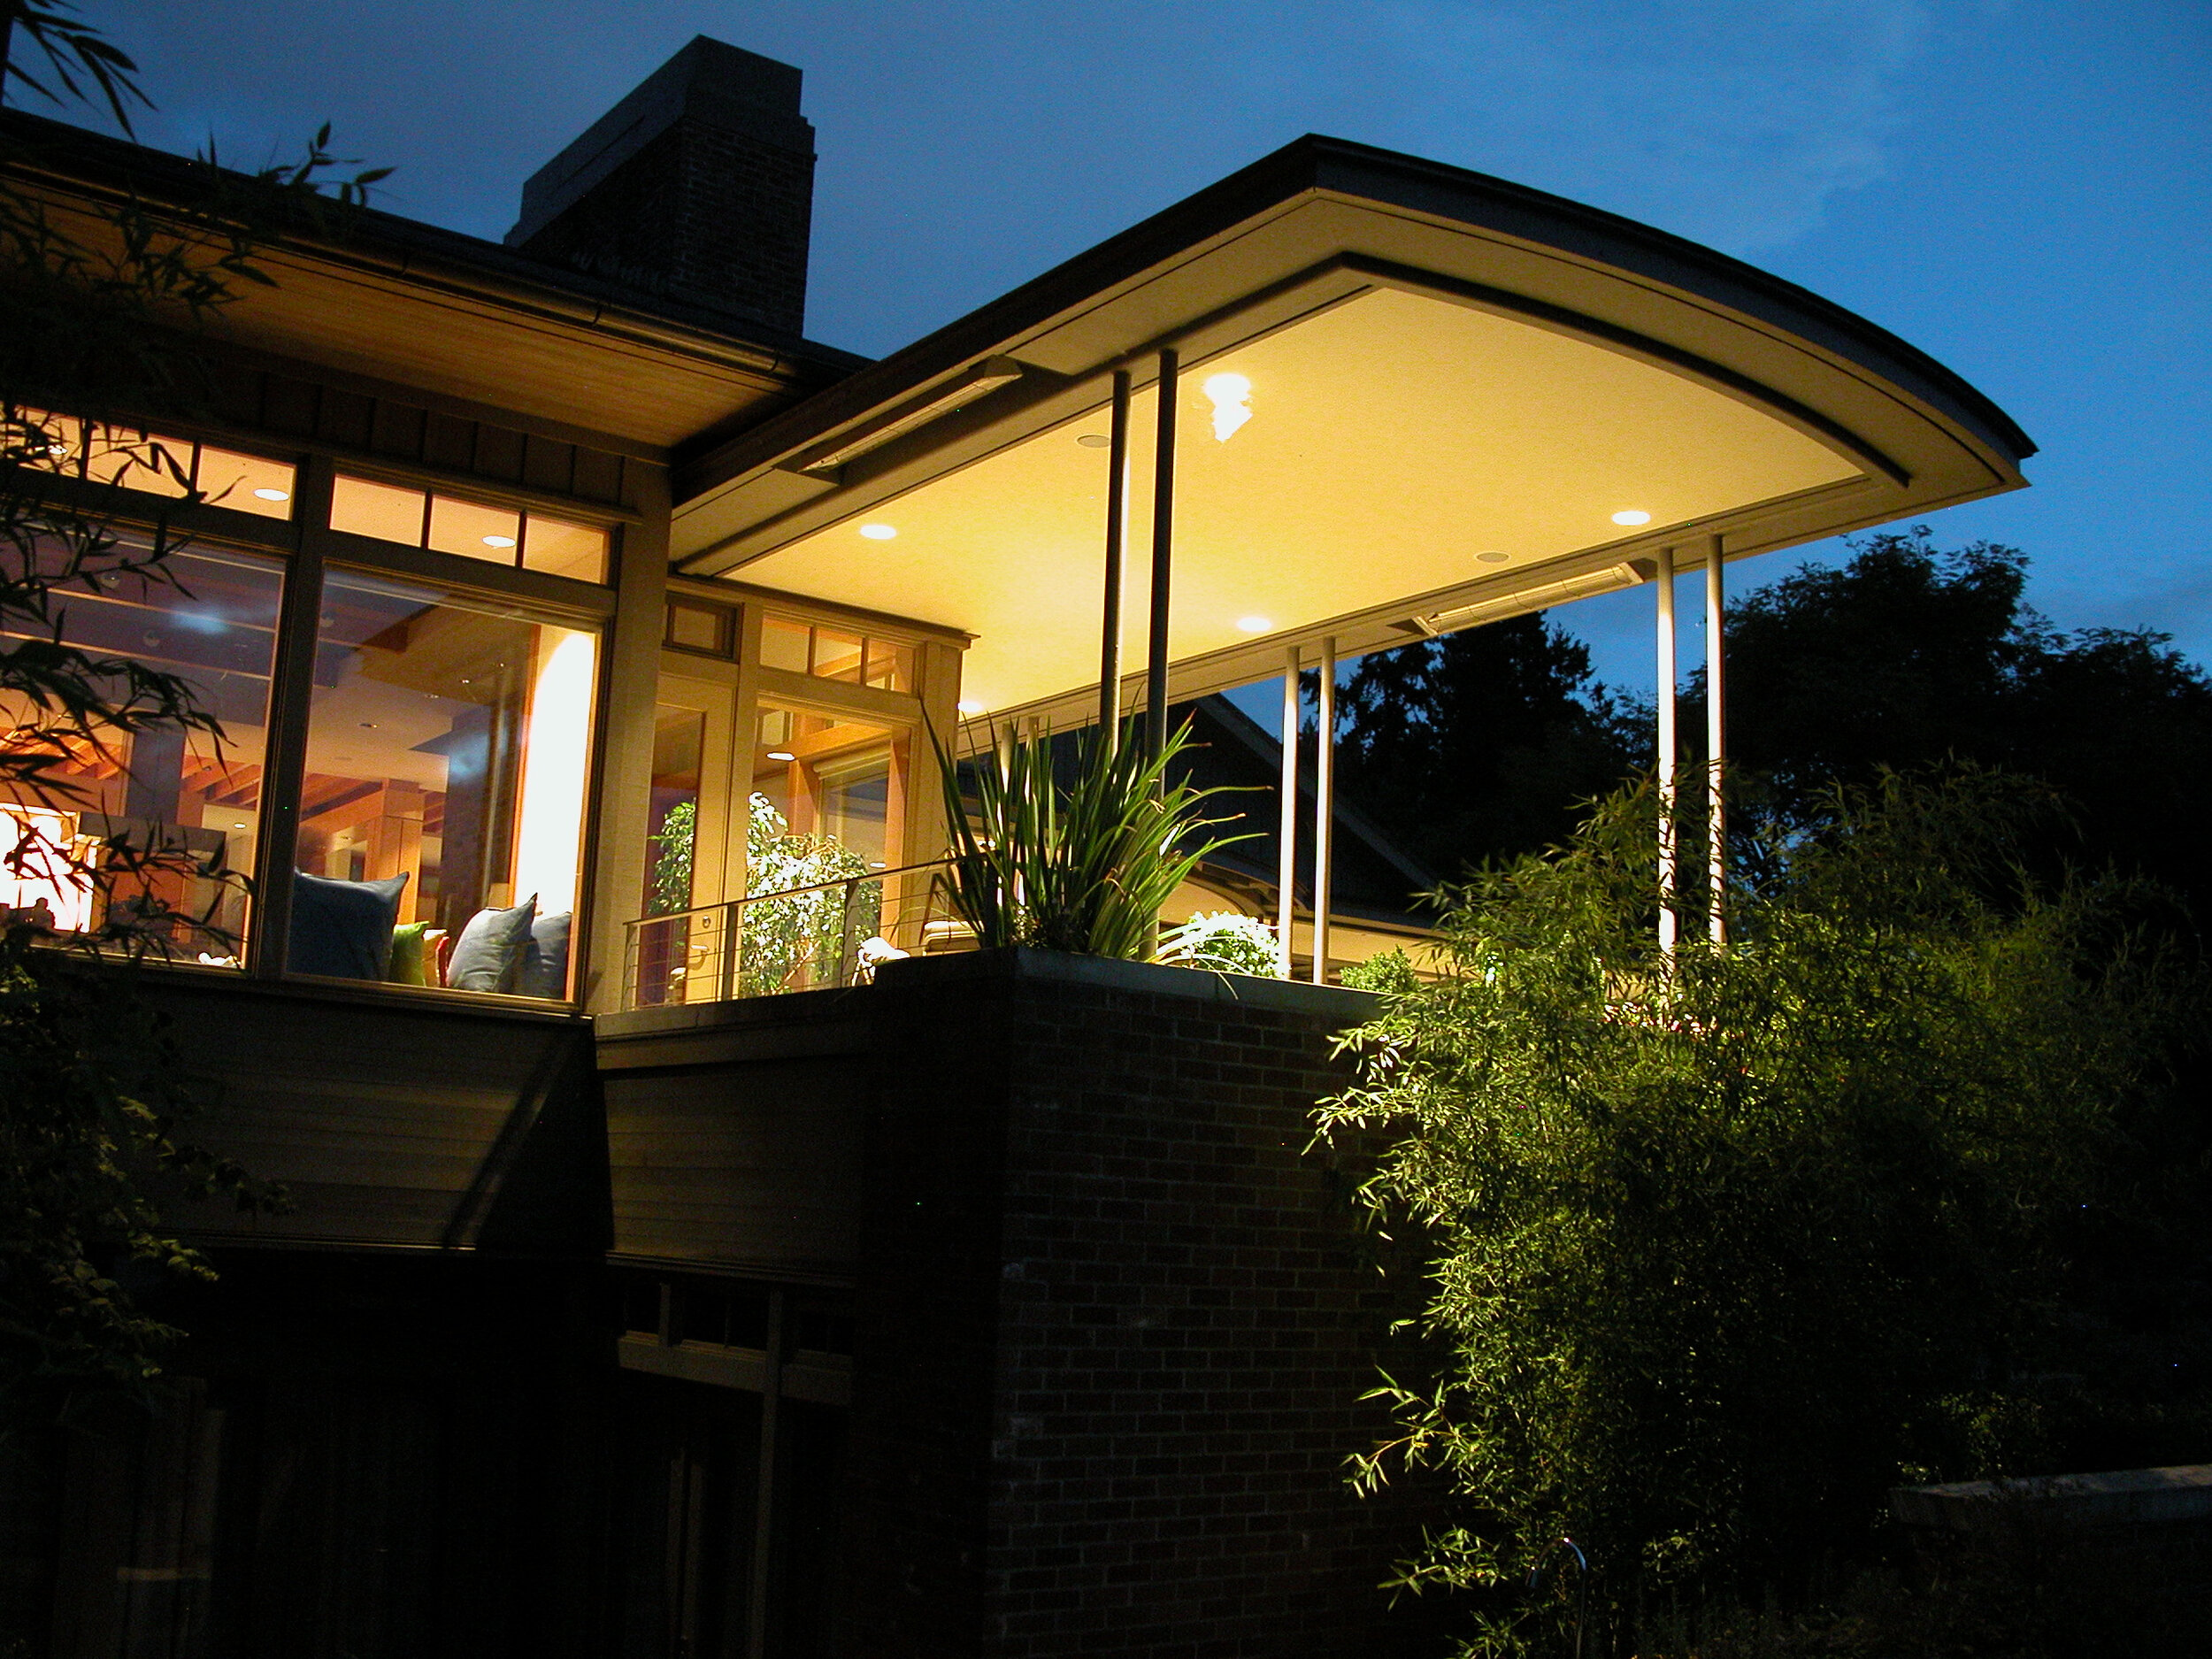 Terrace canopy projection